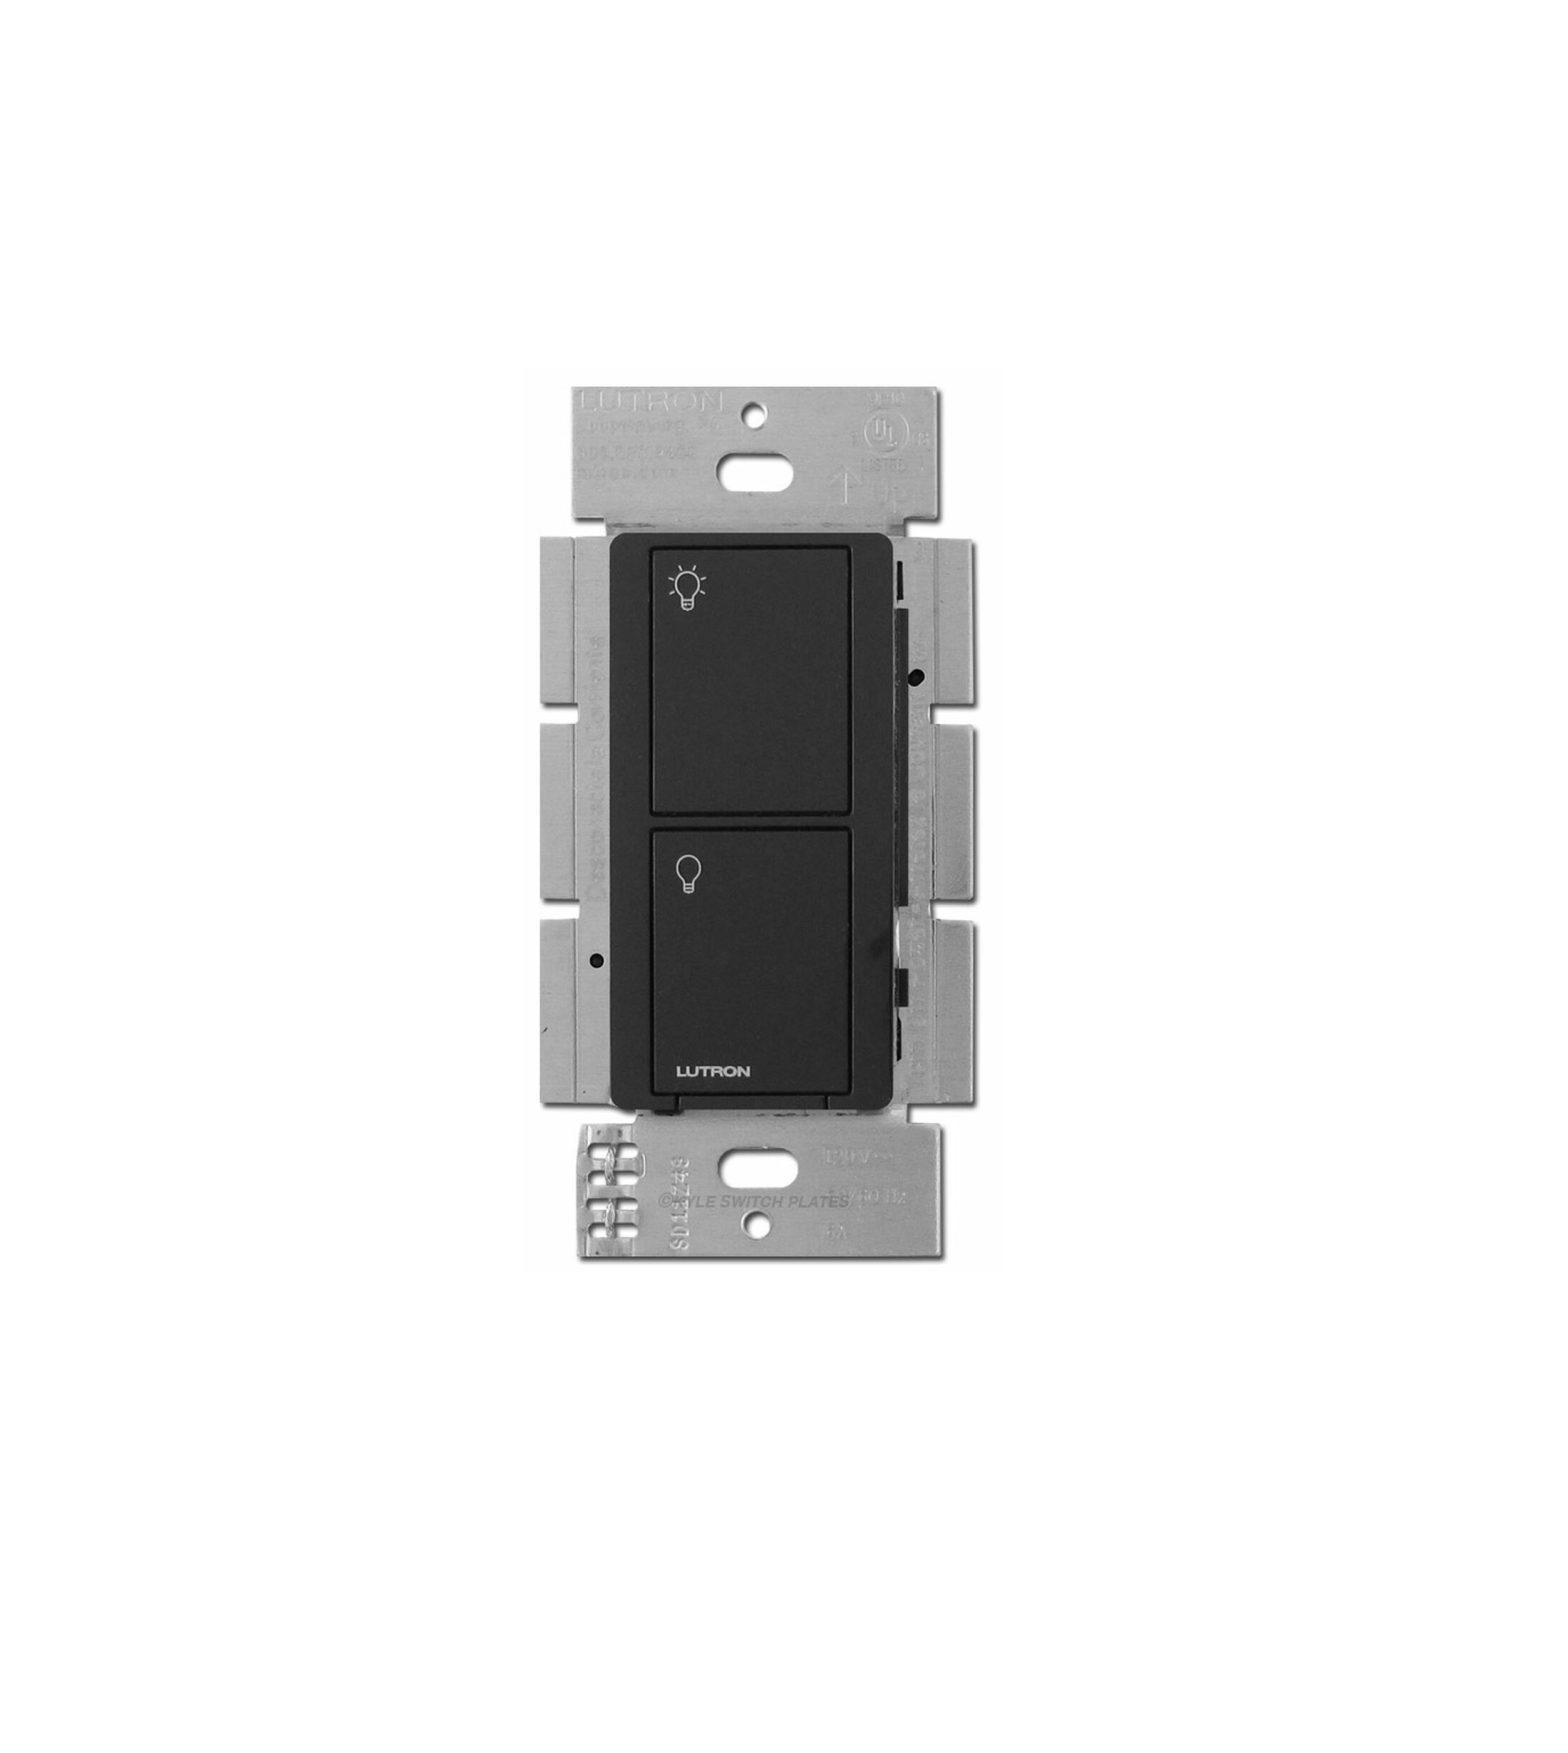 LUTRON P-PKG1WB-WH Caseta Wireless Smart Home Dimmer Switch and Pico Remote Kit User Guide